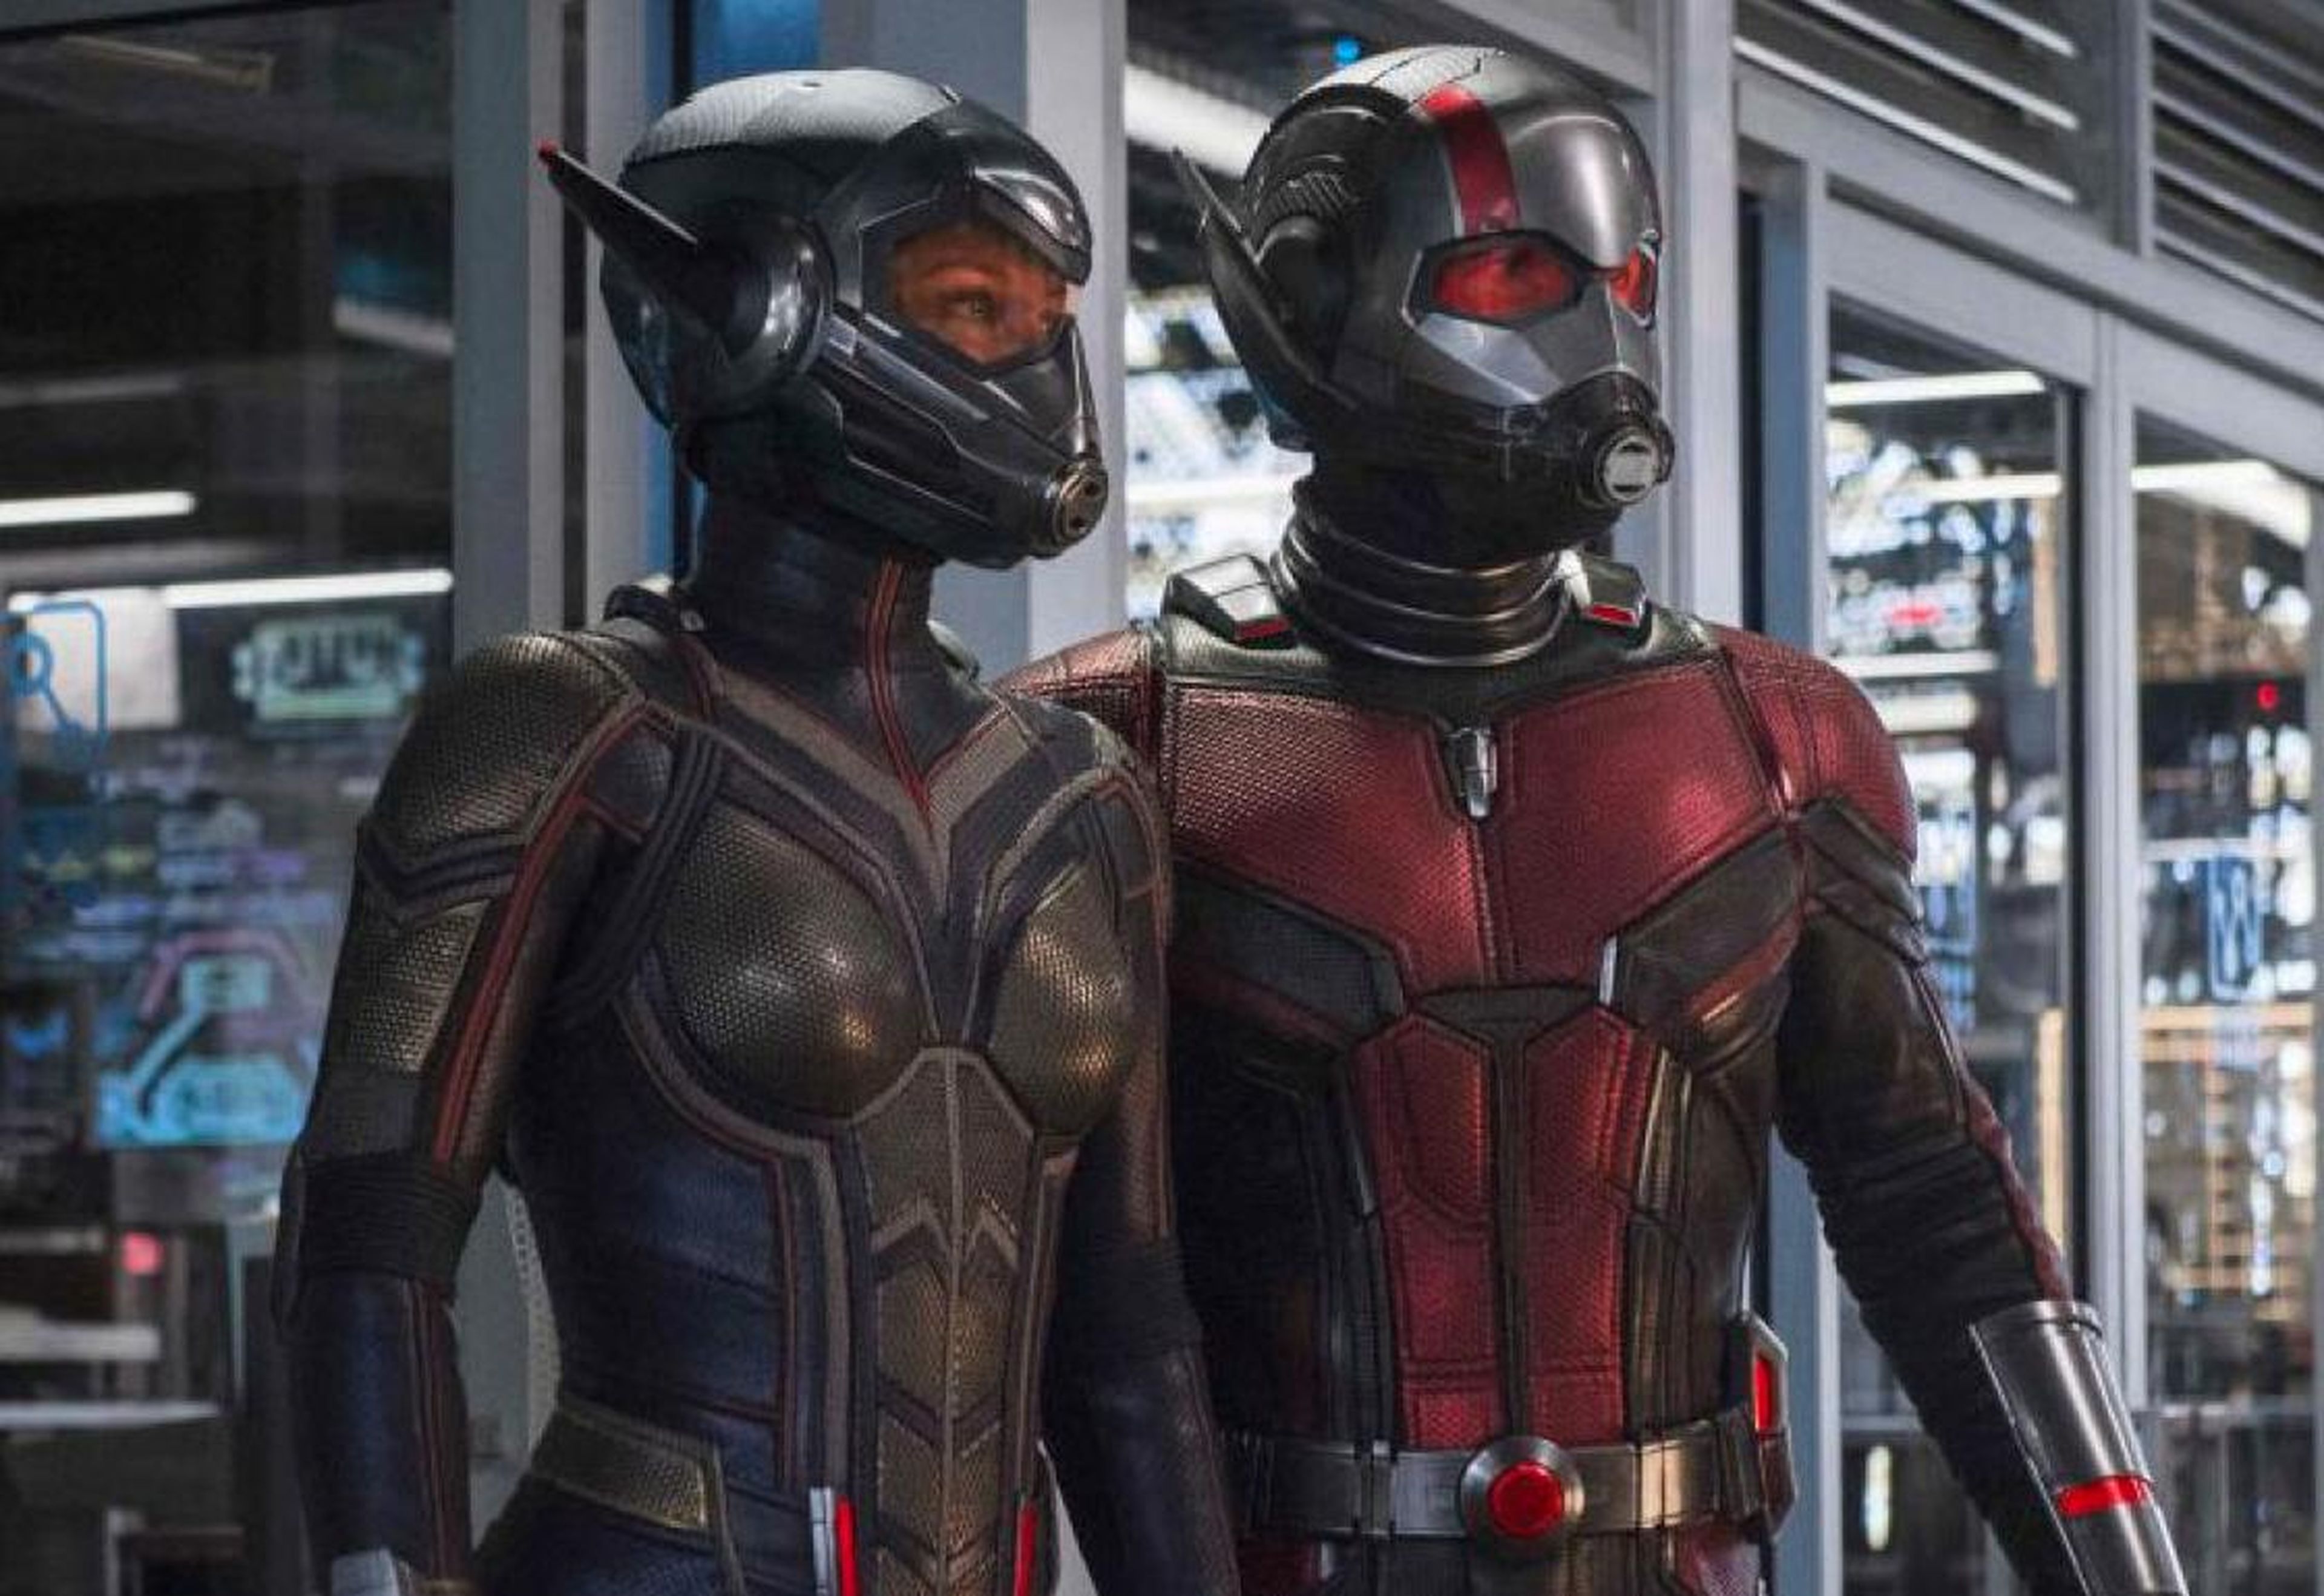 14. "Ant-Man and the Wasp" (2018)